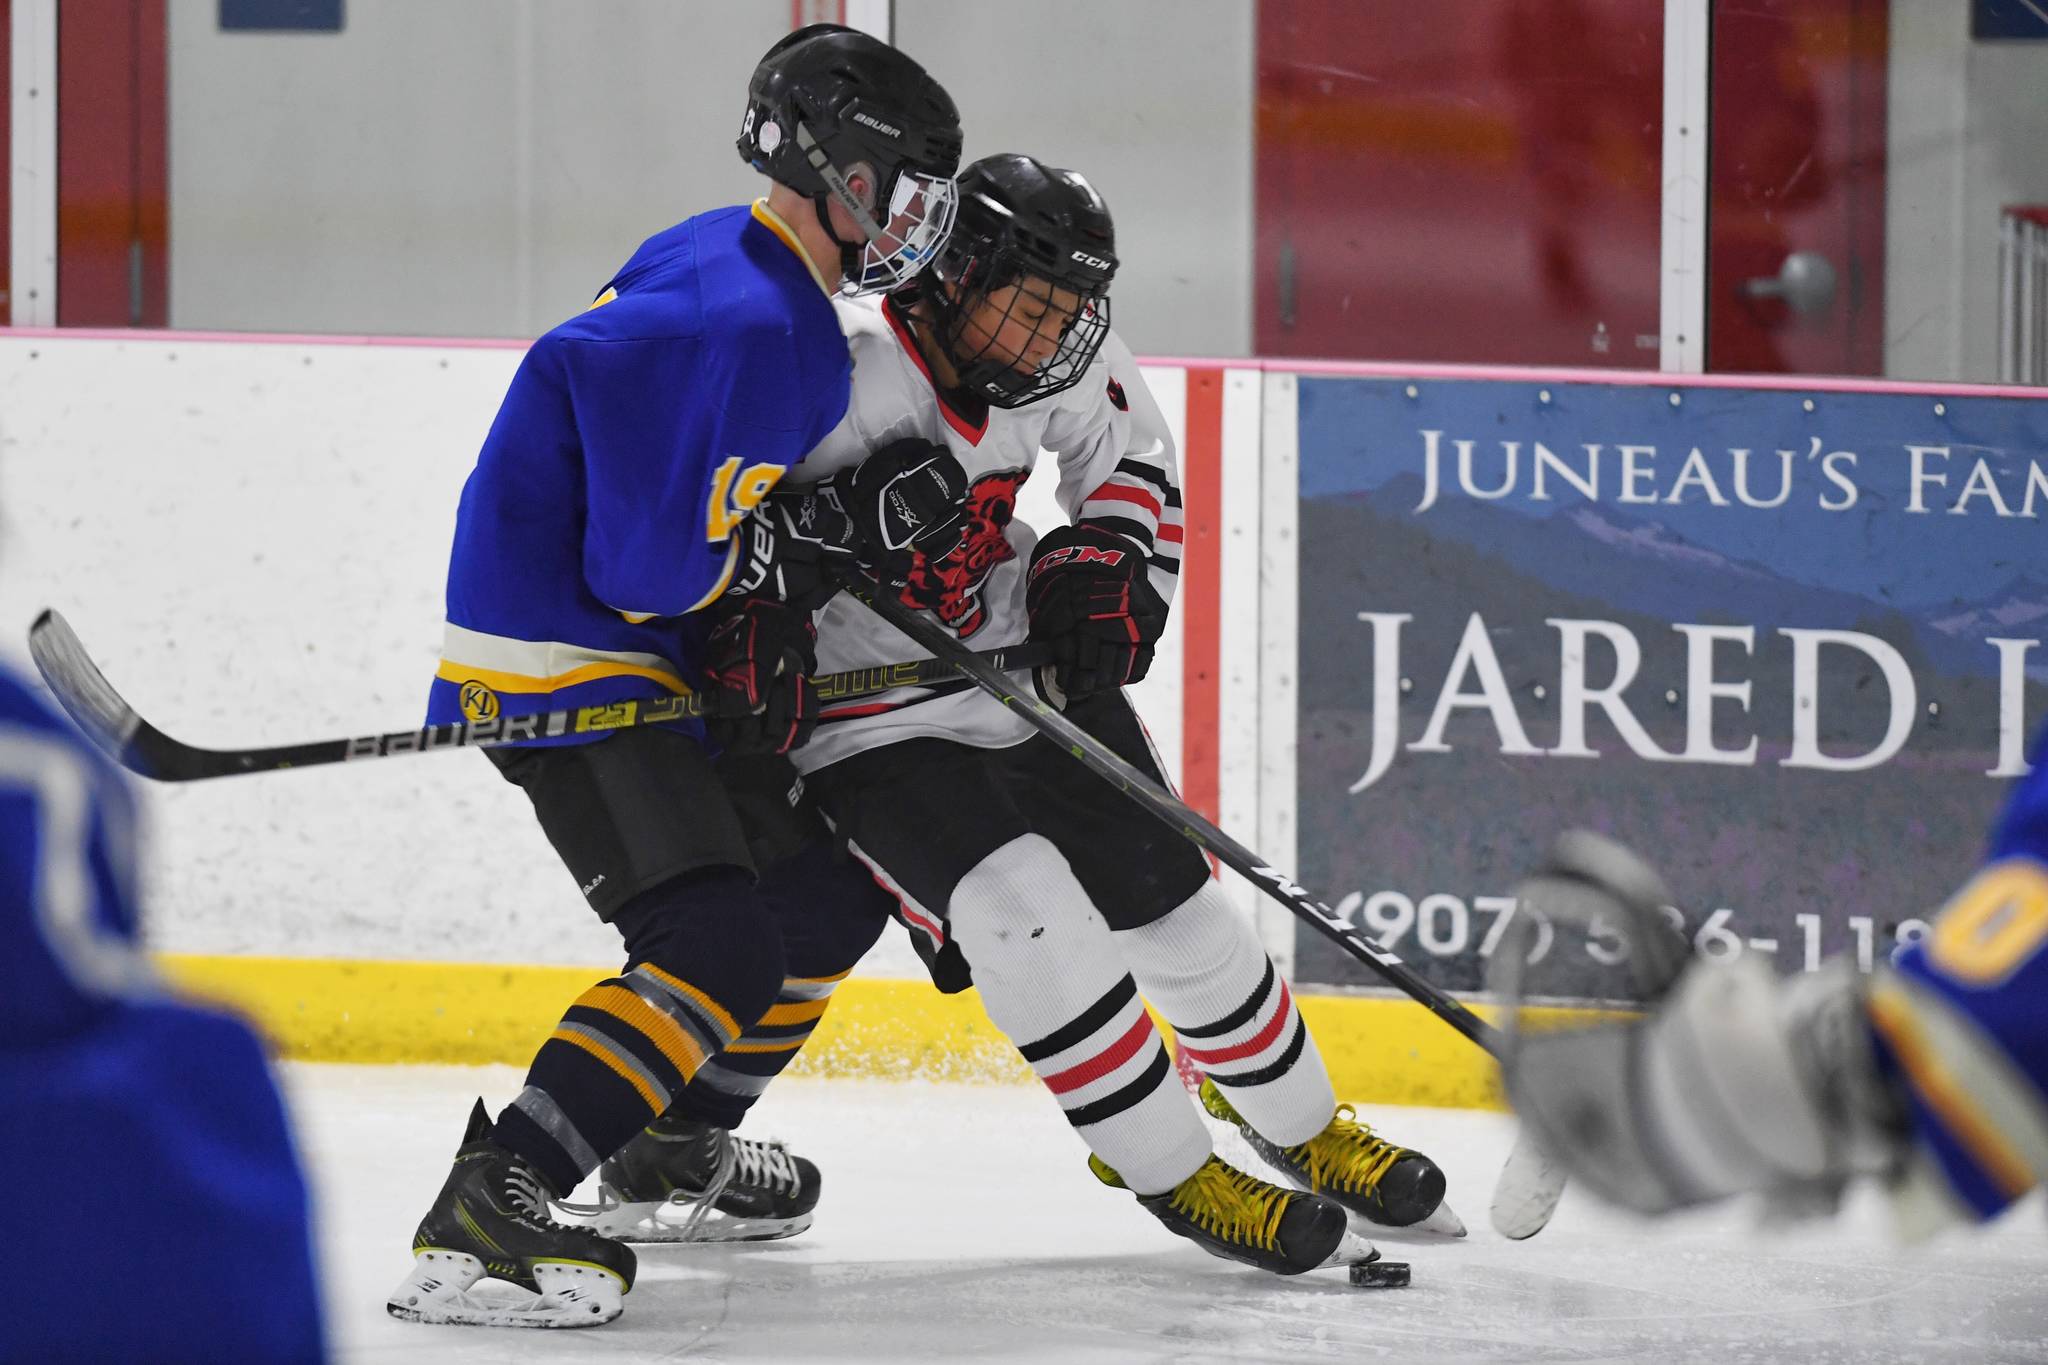 Juneau-Douglas’ Andre Peirovi, right, gets tied up against Monroe’s Dom Coiley in the second period of the first hockey game of the season on Friday, Nov. 15, 2019. (Michael Penn | Juneau Empire File)